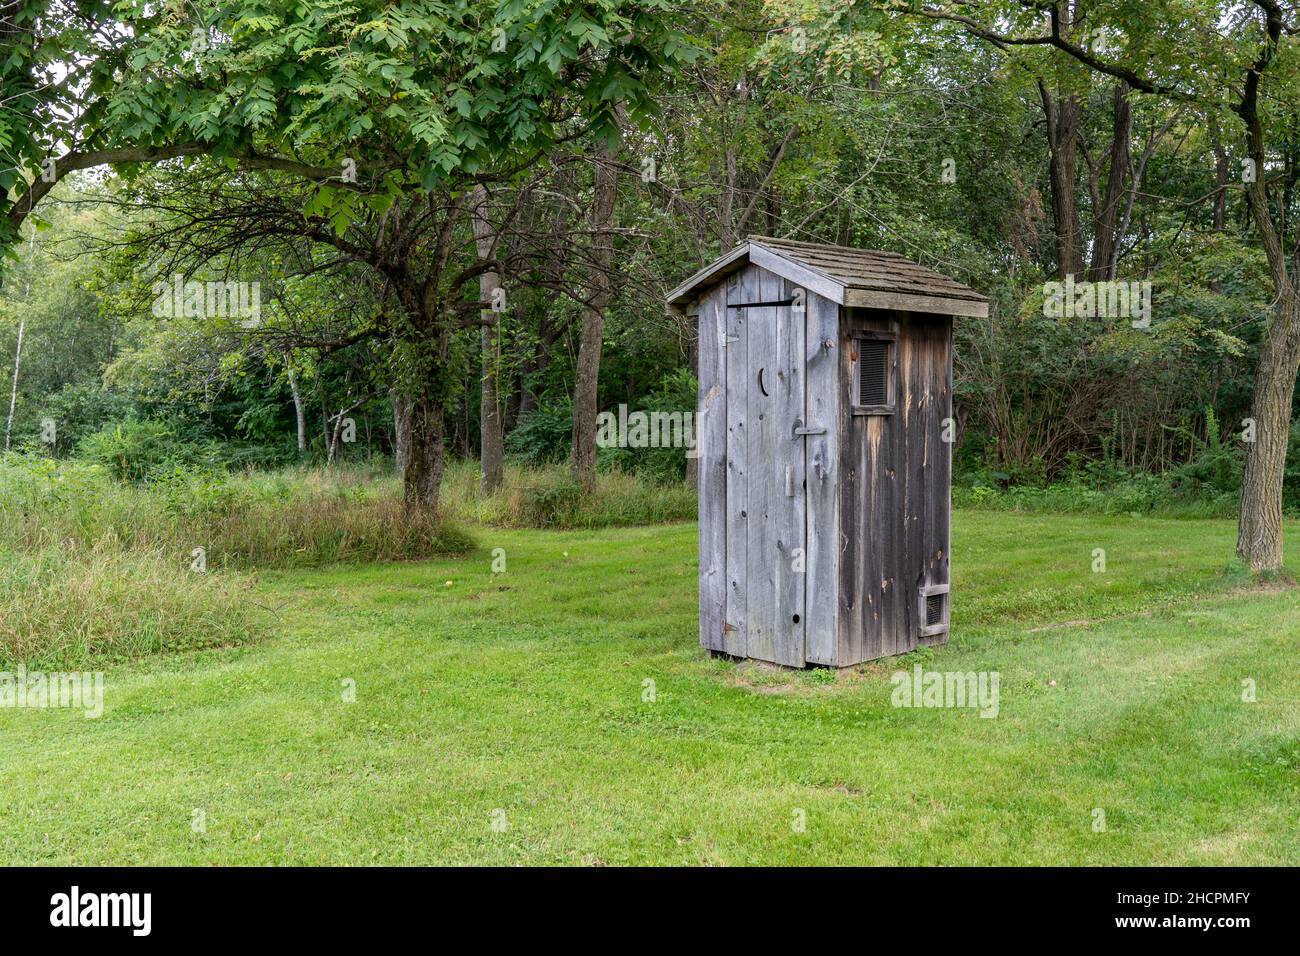 An old outhouse or potting shed on a green lawn. Stock Photo